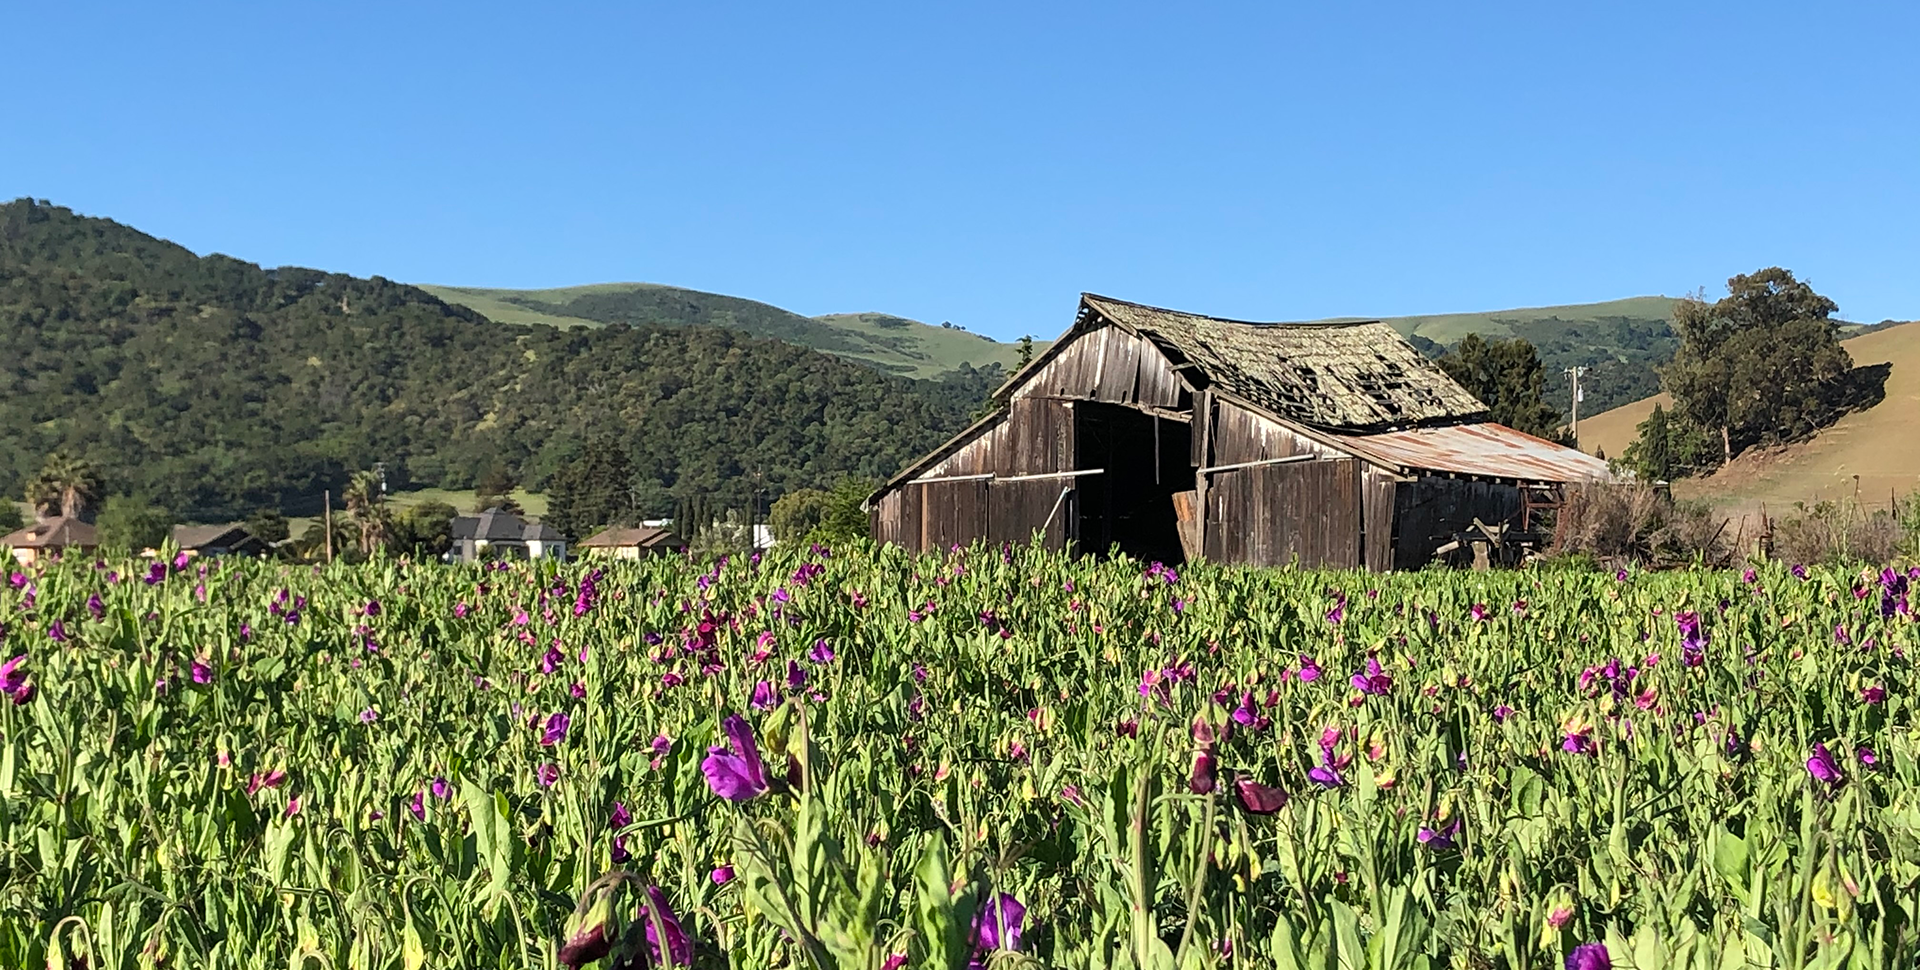 A dilapidated barn in a field of flowers